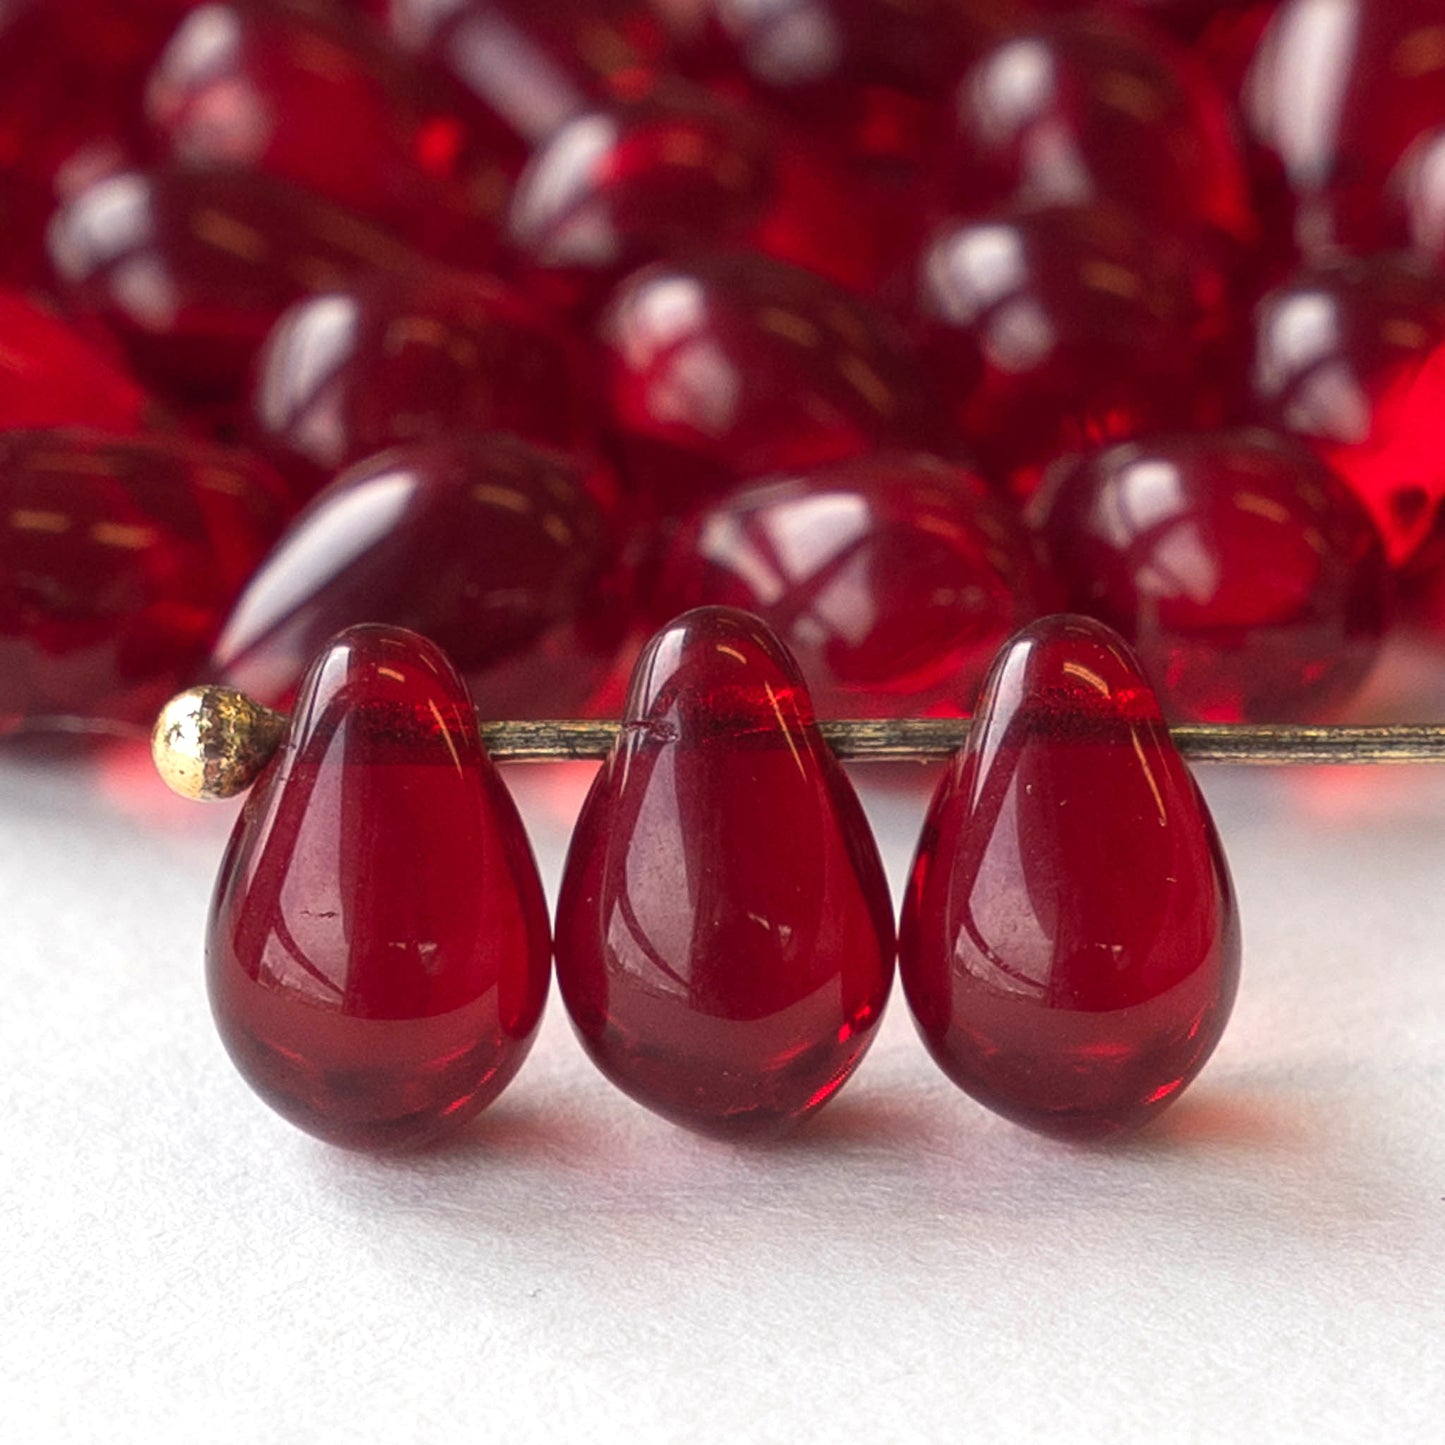 Load image into Gallery viewer, 6x9mm Glass Teardrop Beads - Transparent Dark Red - 50 Beads
